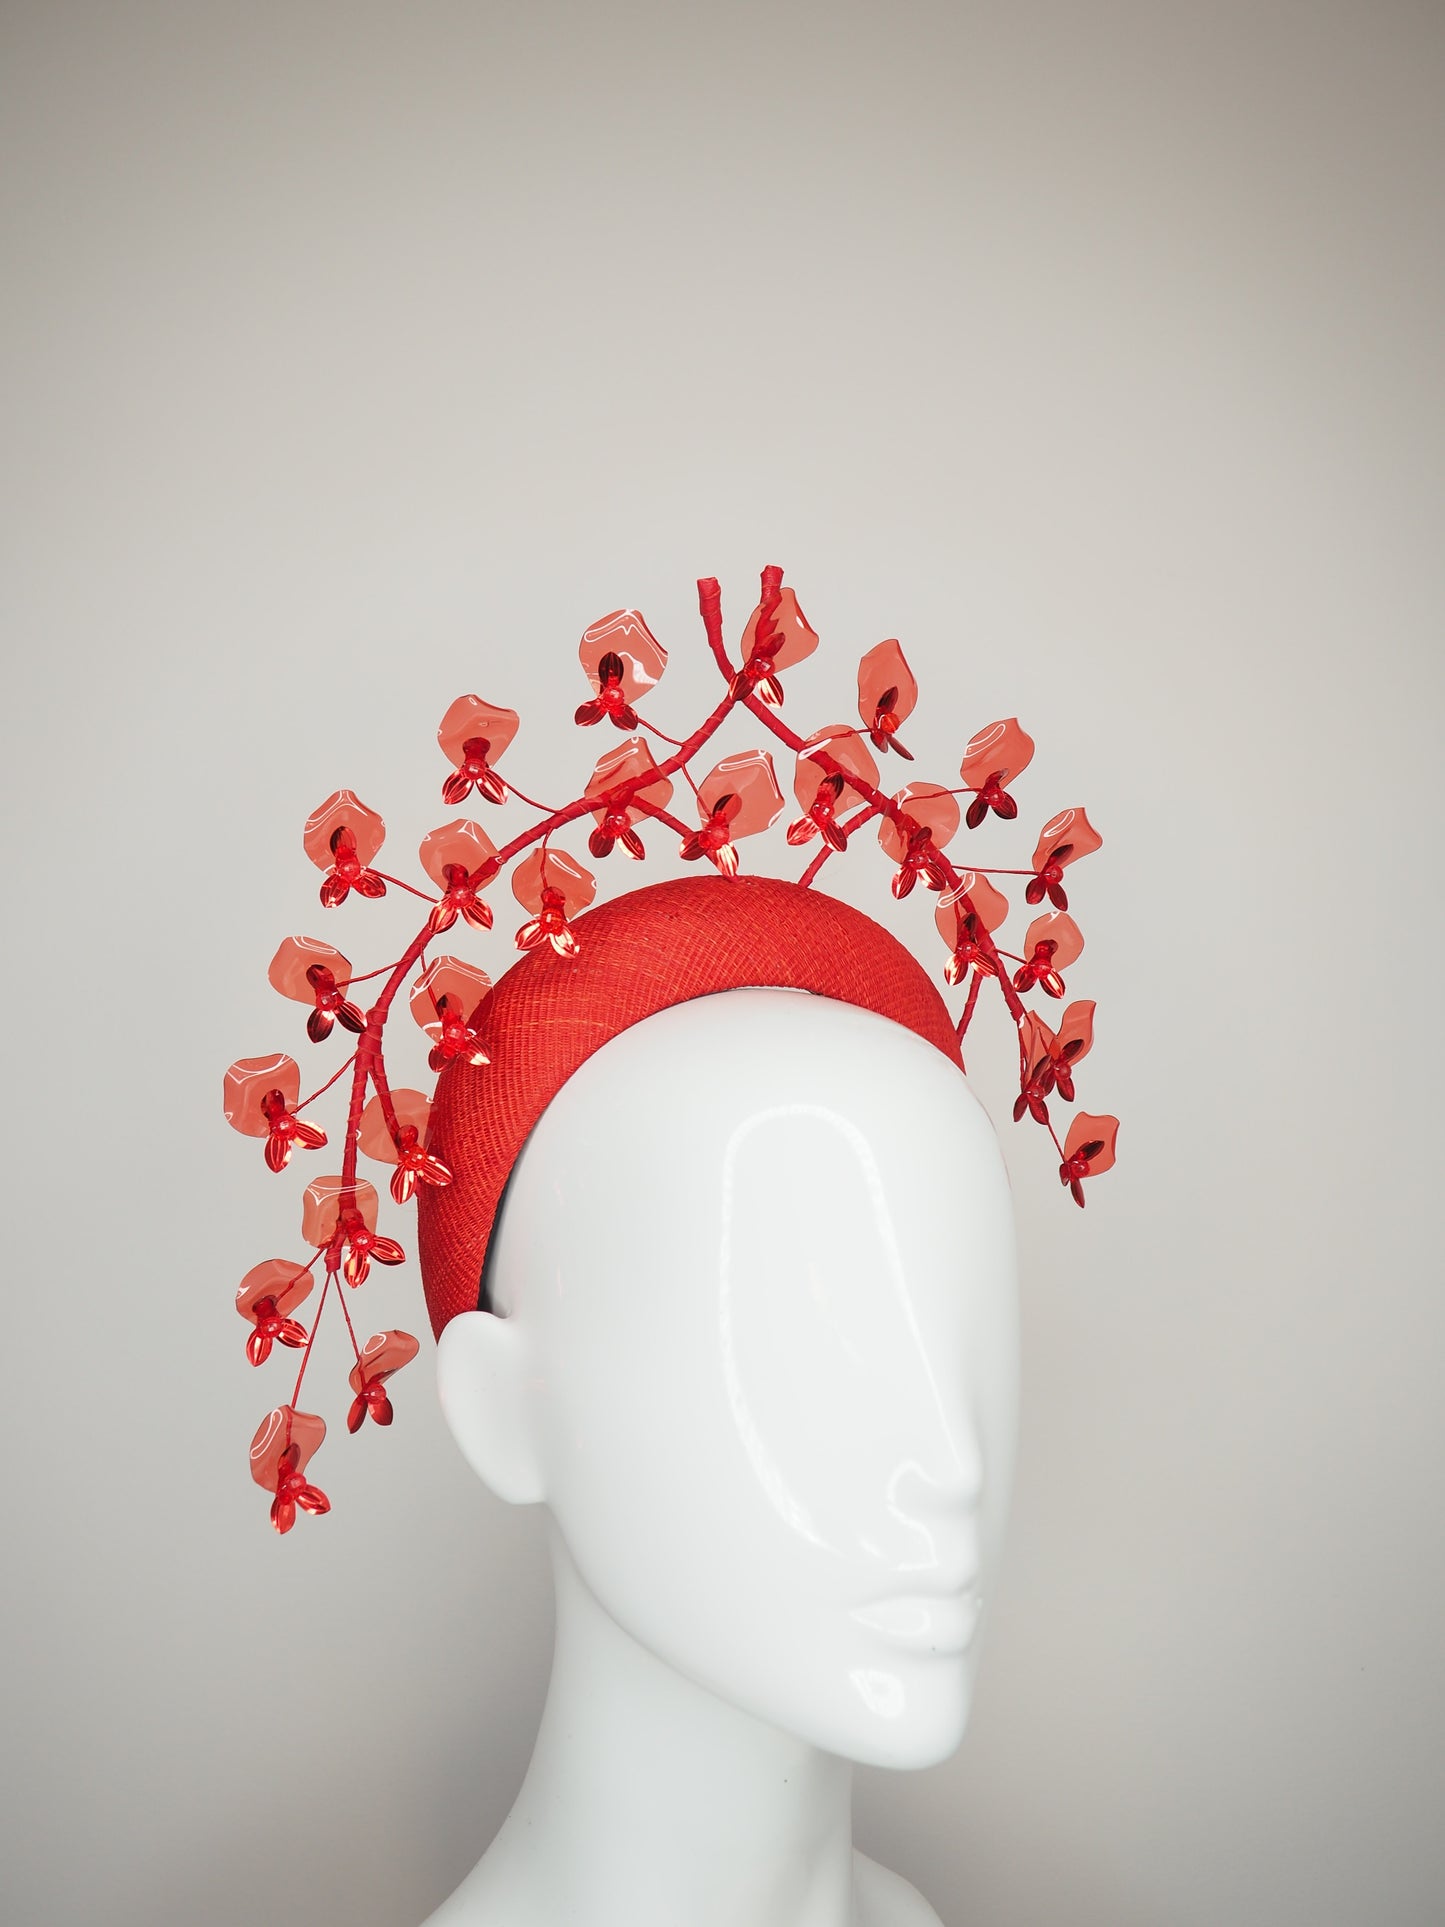 Scarletta - Red tinilac straw 3D headband with draping crystoform wisteria flowers